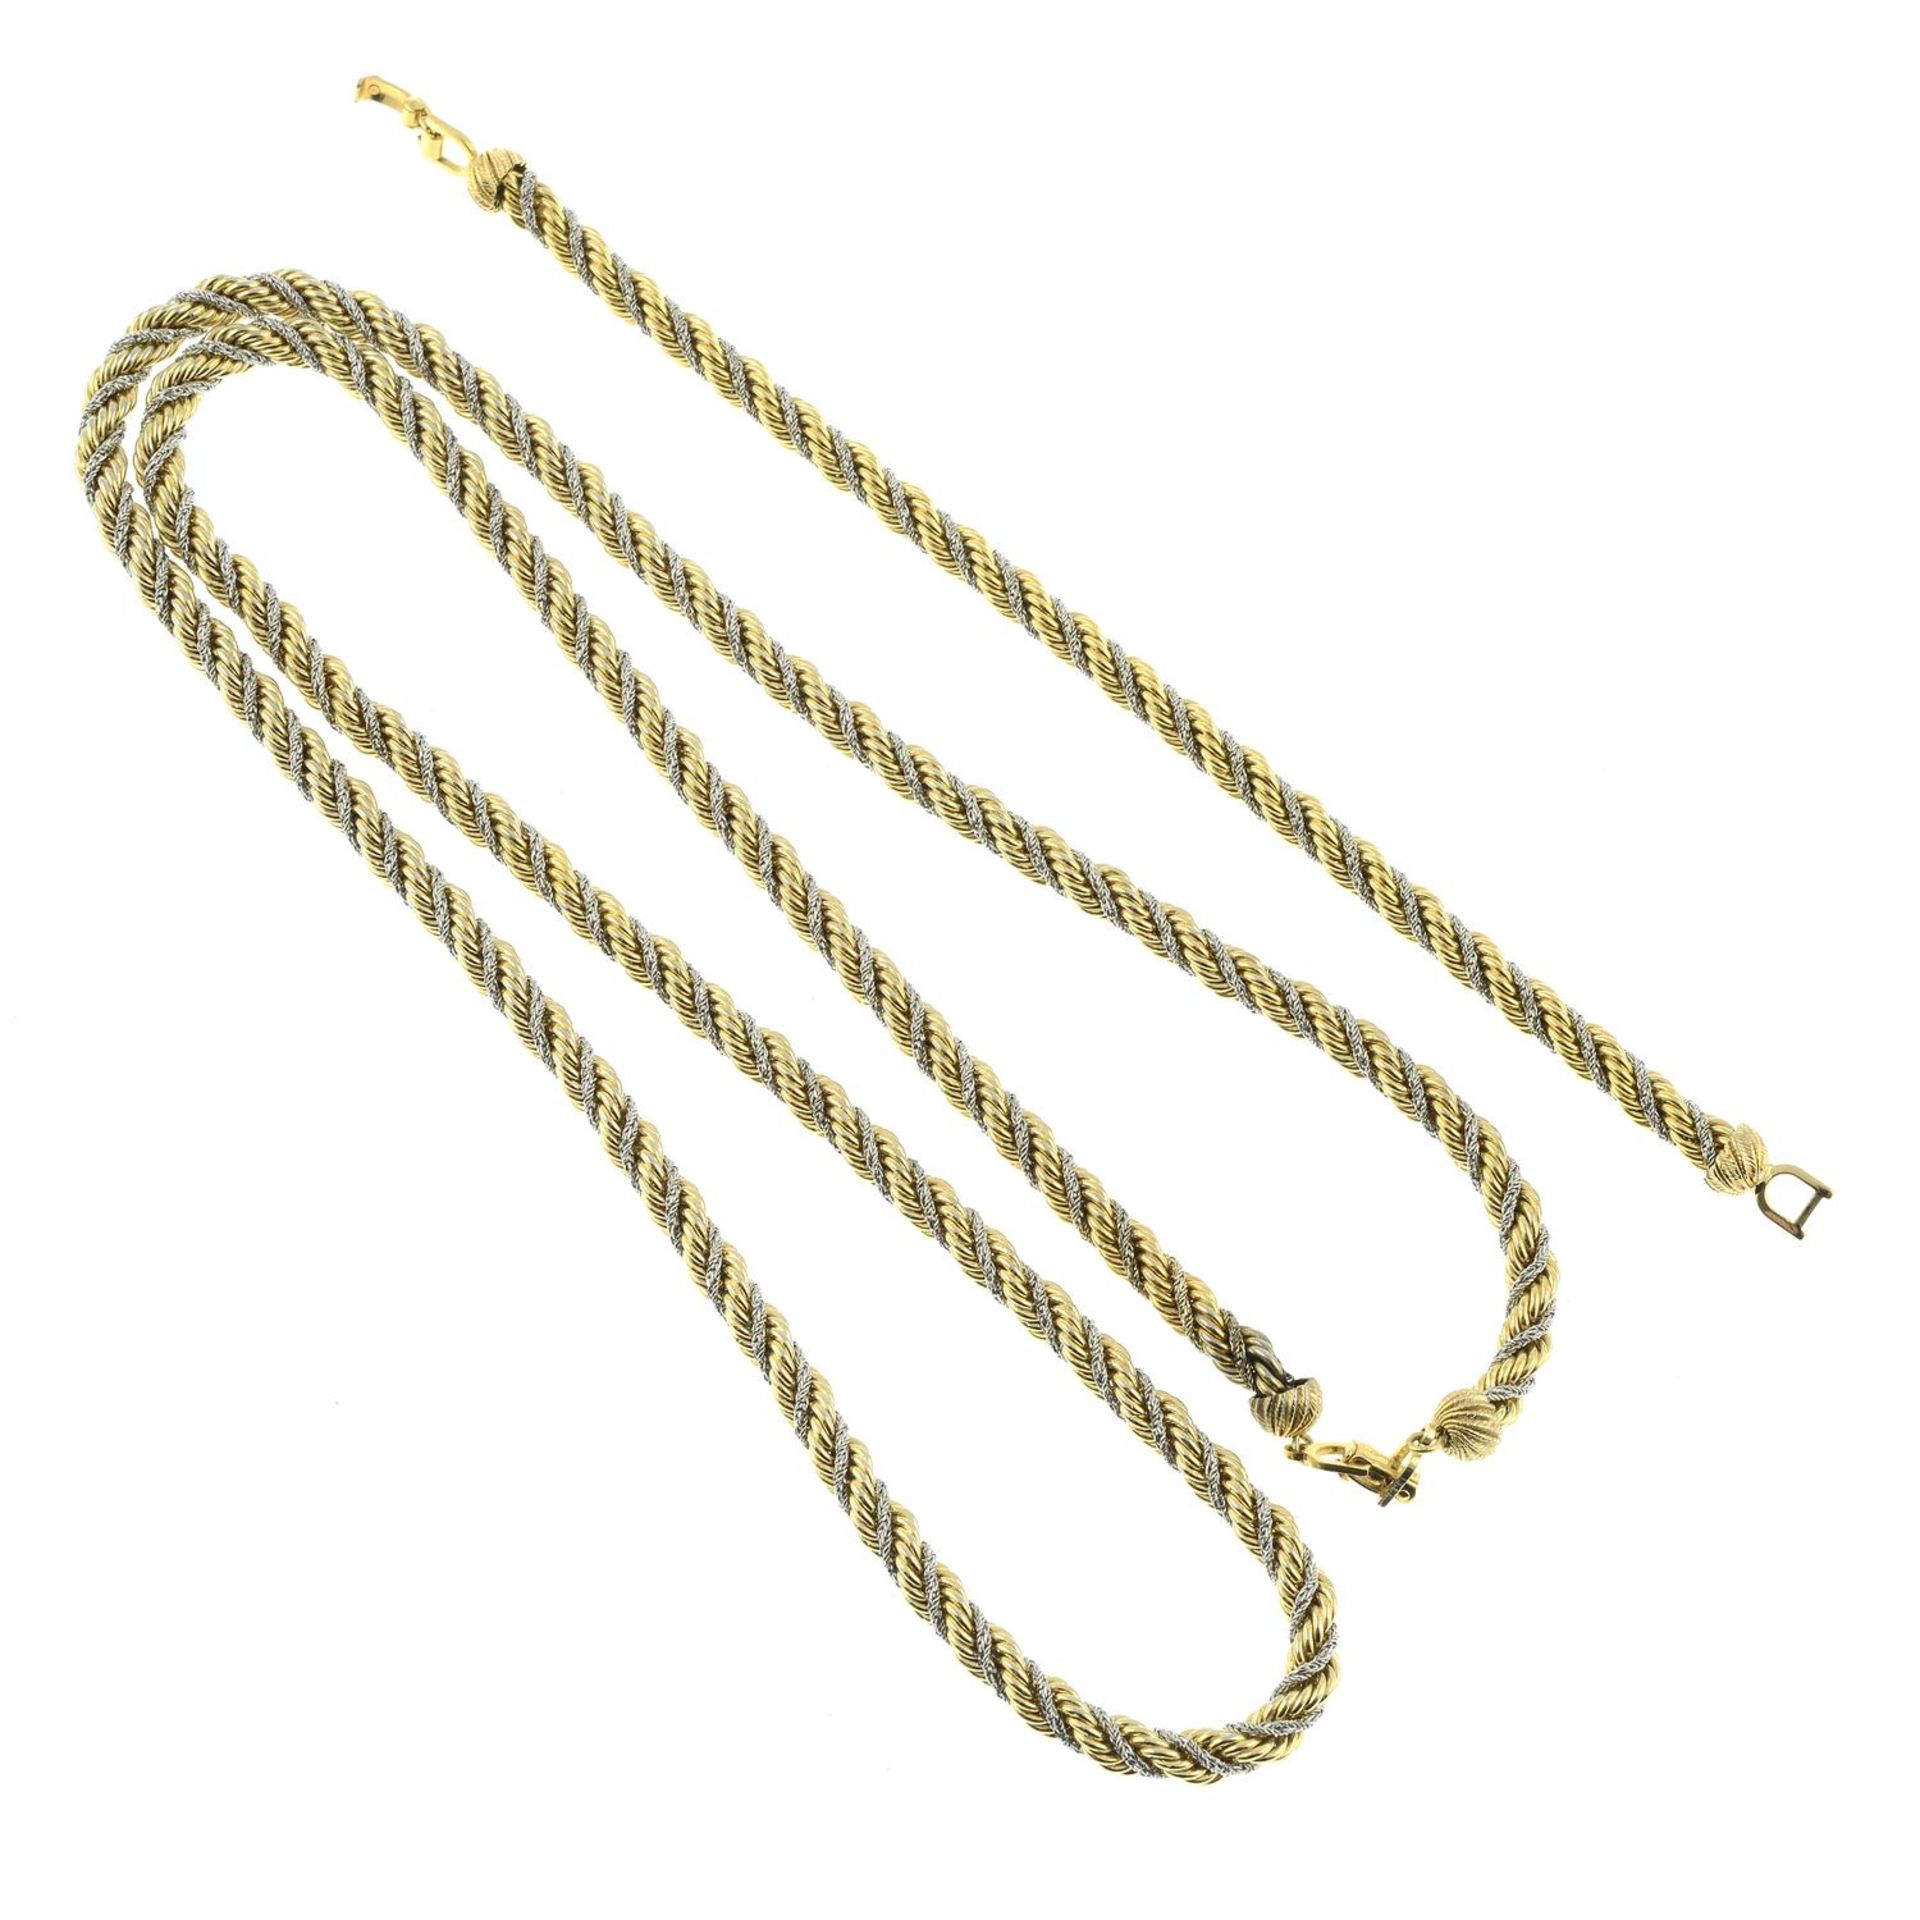 CHRISTIAN DIOR - a two-tone rope chain necklace and braclet. - Image 2 of 3